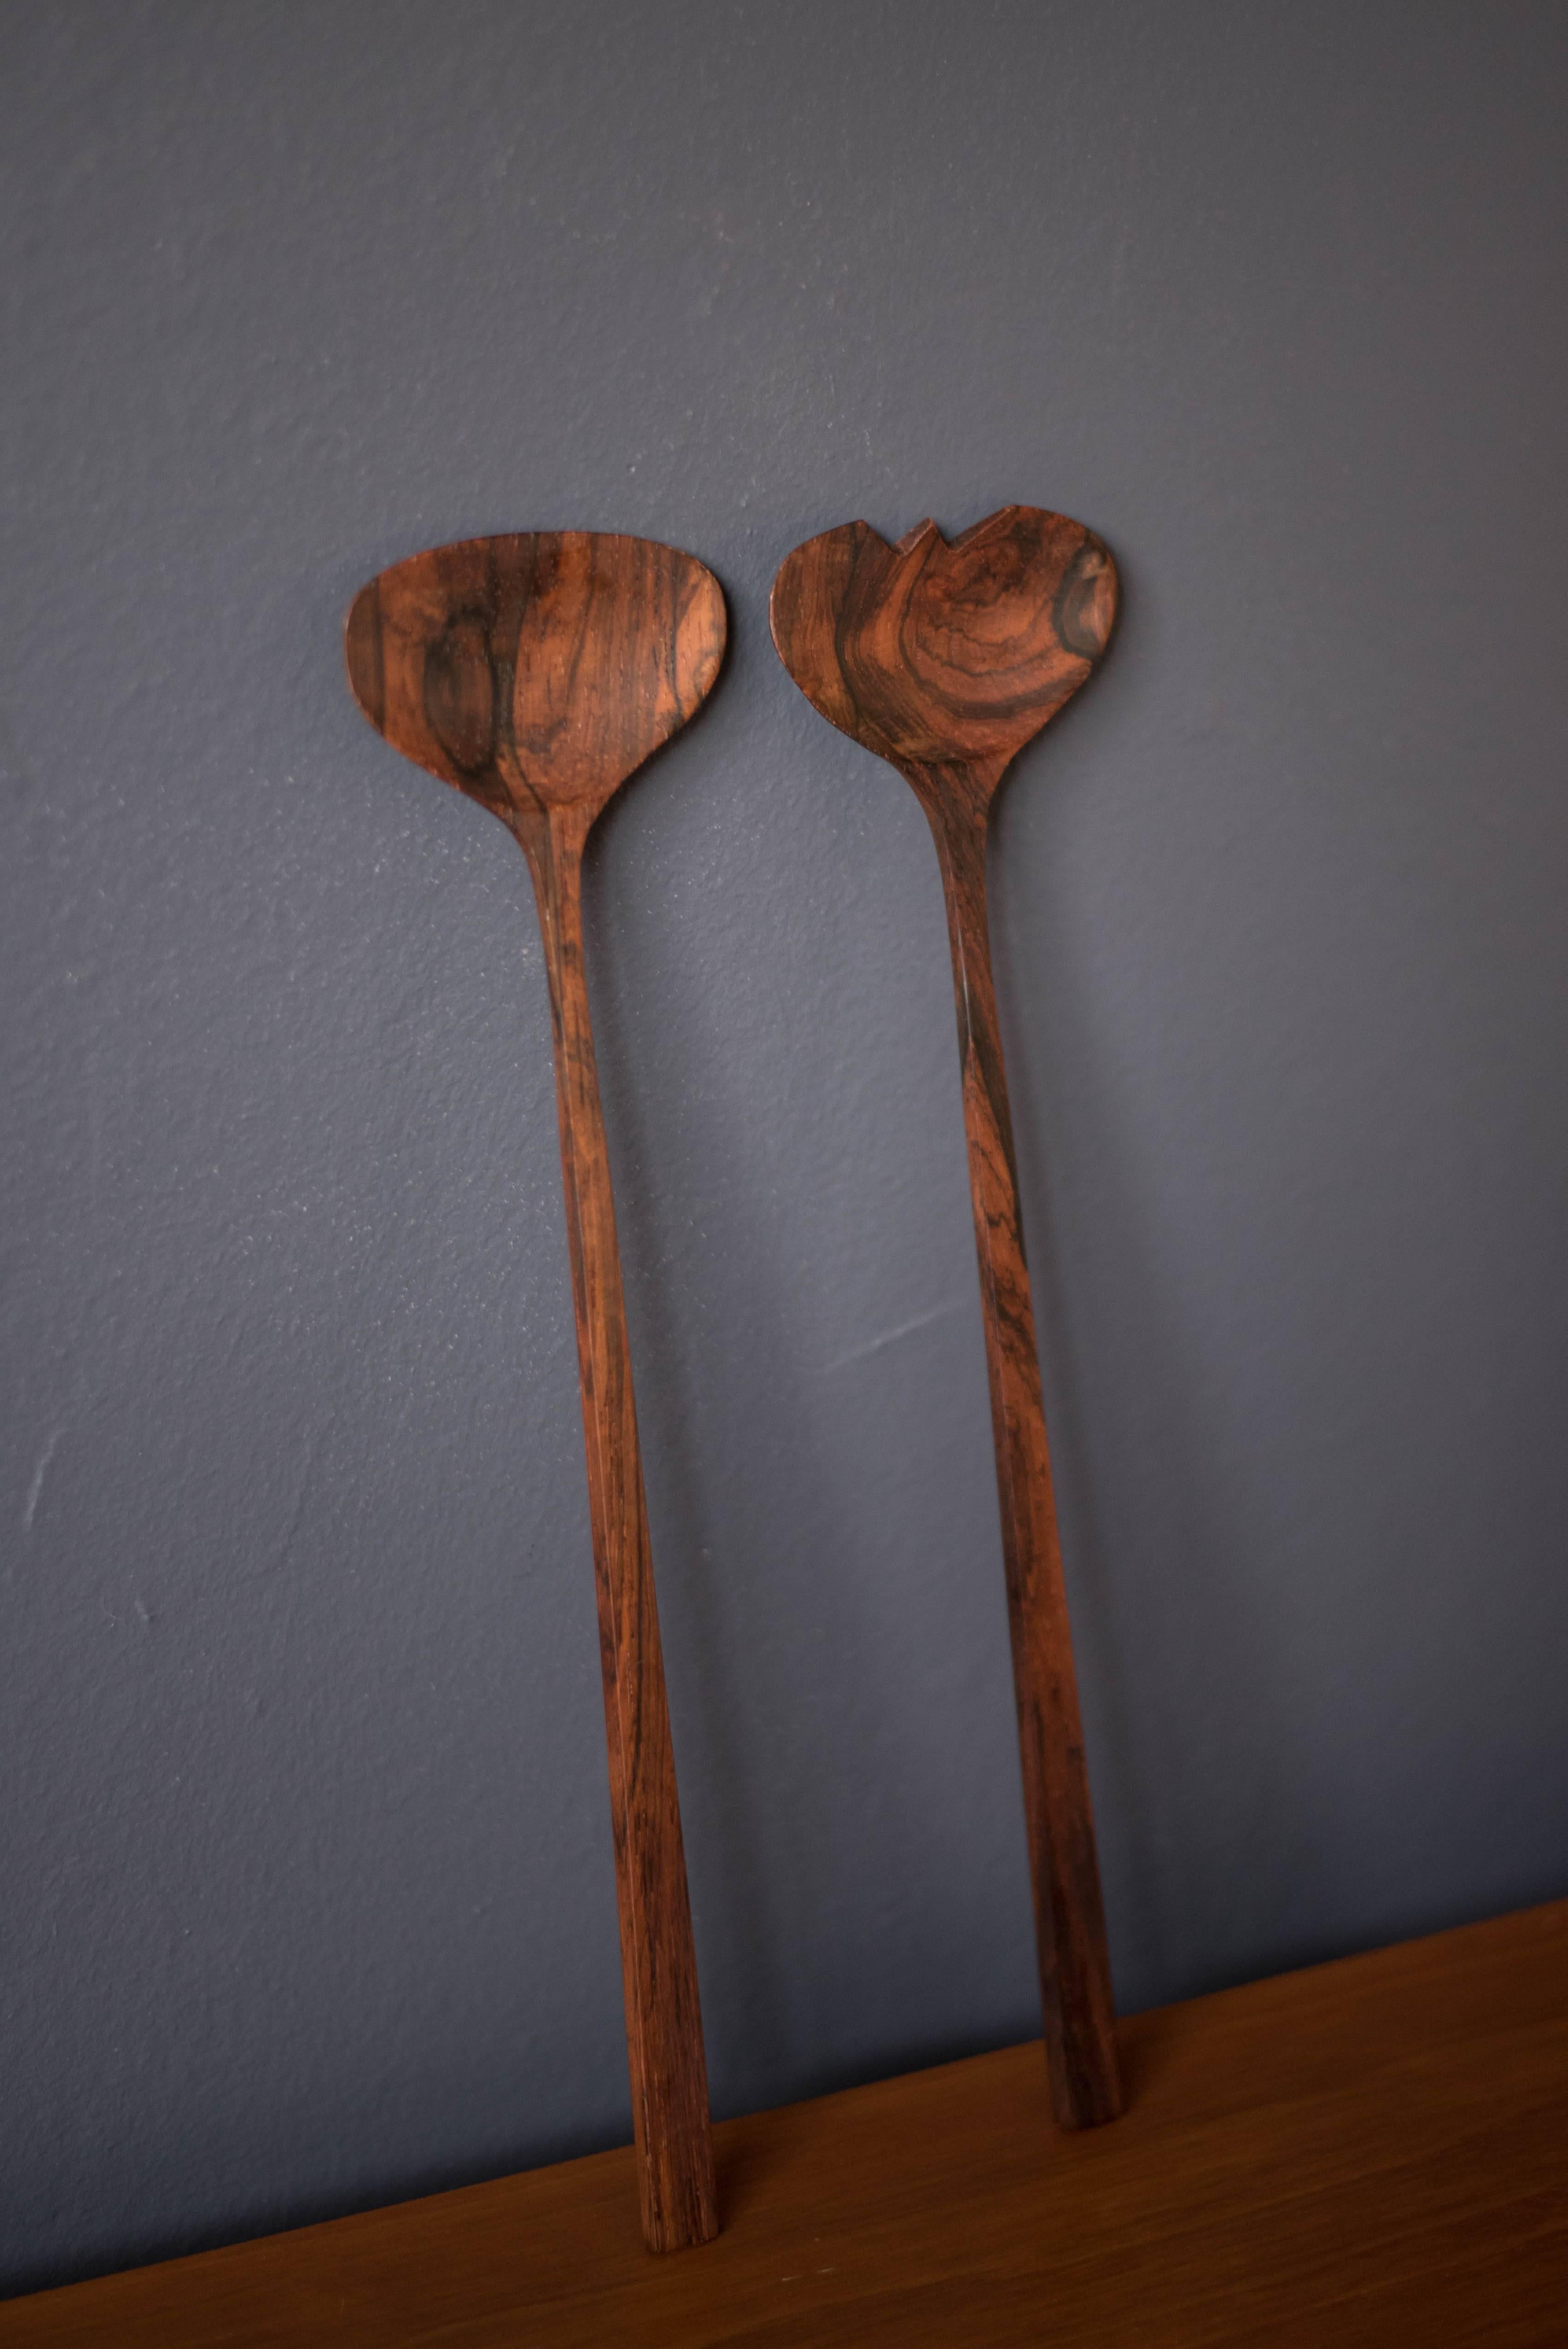 Vintage salad servers by Hans Gustav Ehrenreich of Denmark. This pair was handcrafted with modern design and is made of solid rosewood.